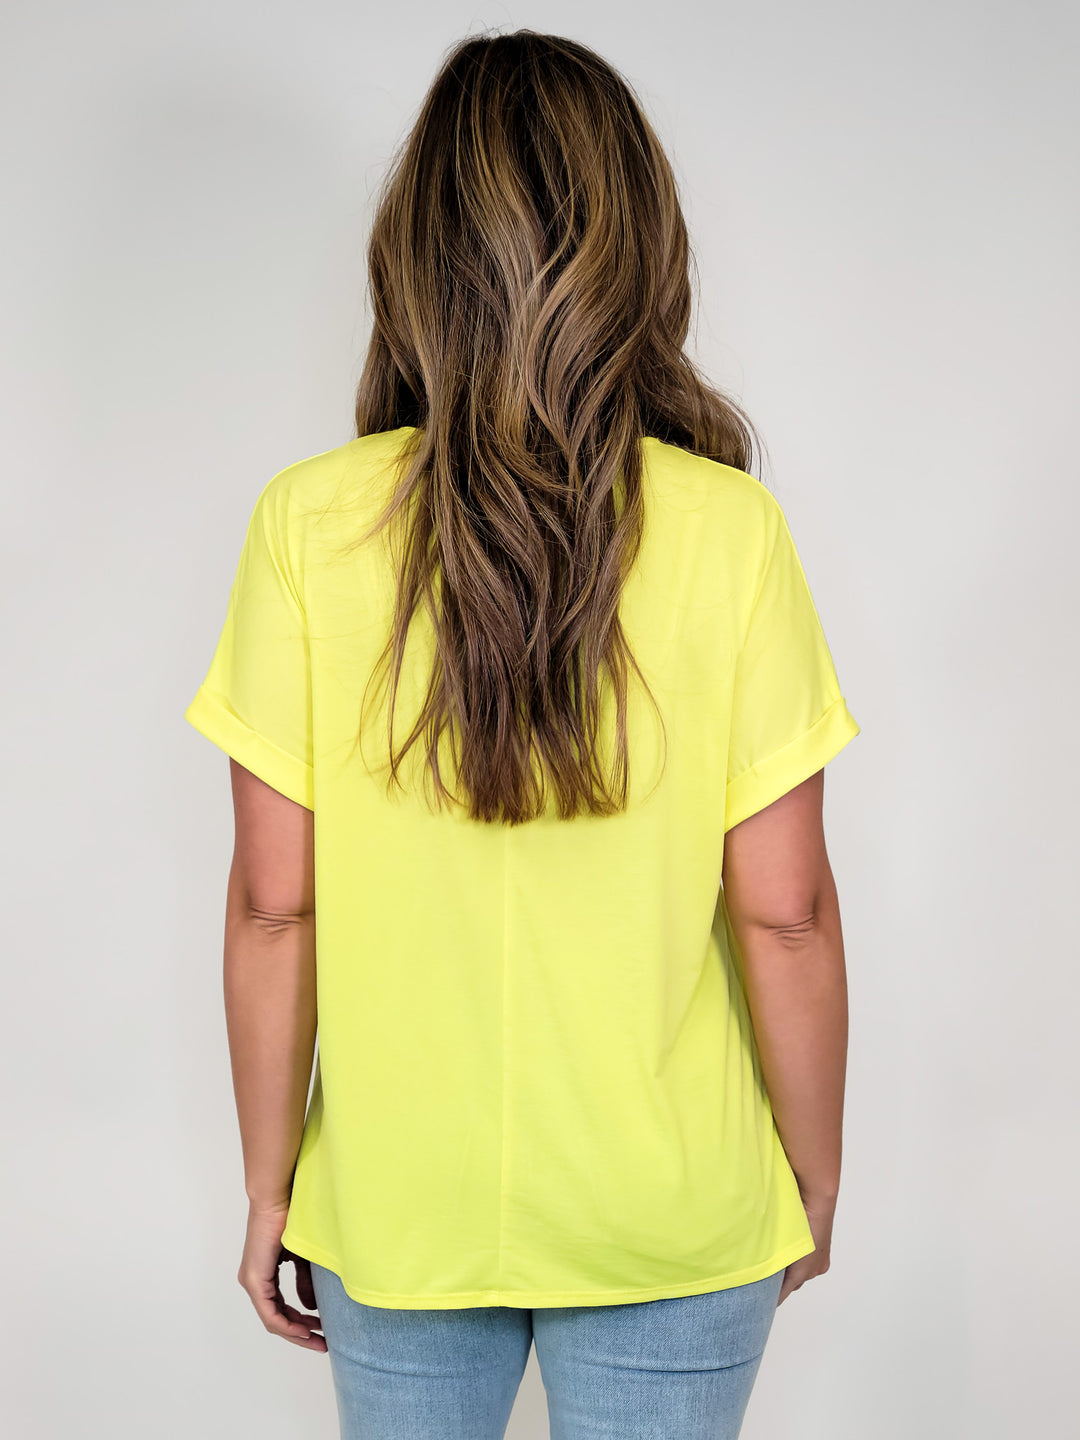 SOLID STRETCHY CAP SLEEVE DOLMAN TOP - NEON YELLOW